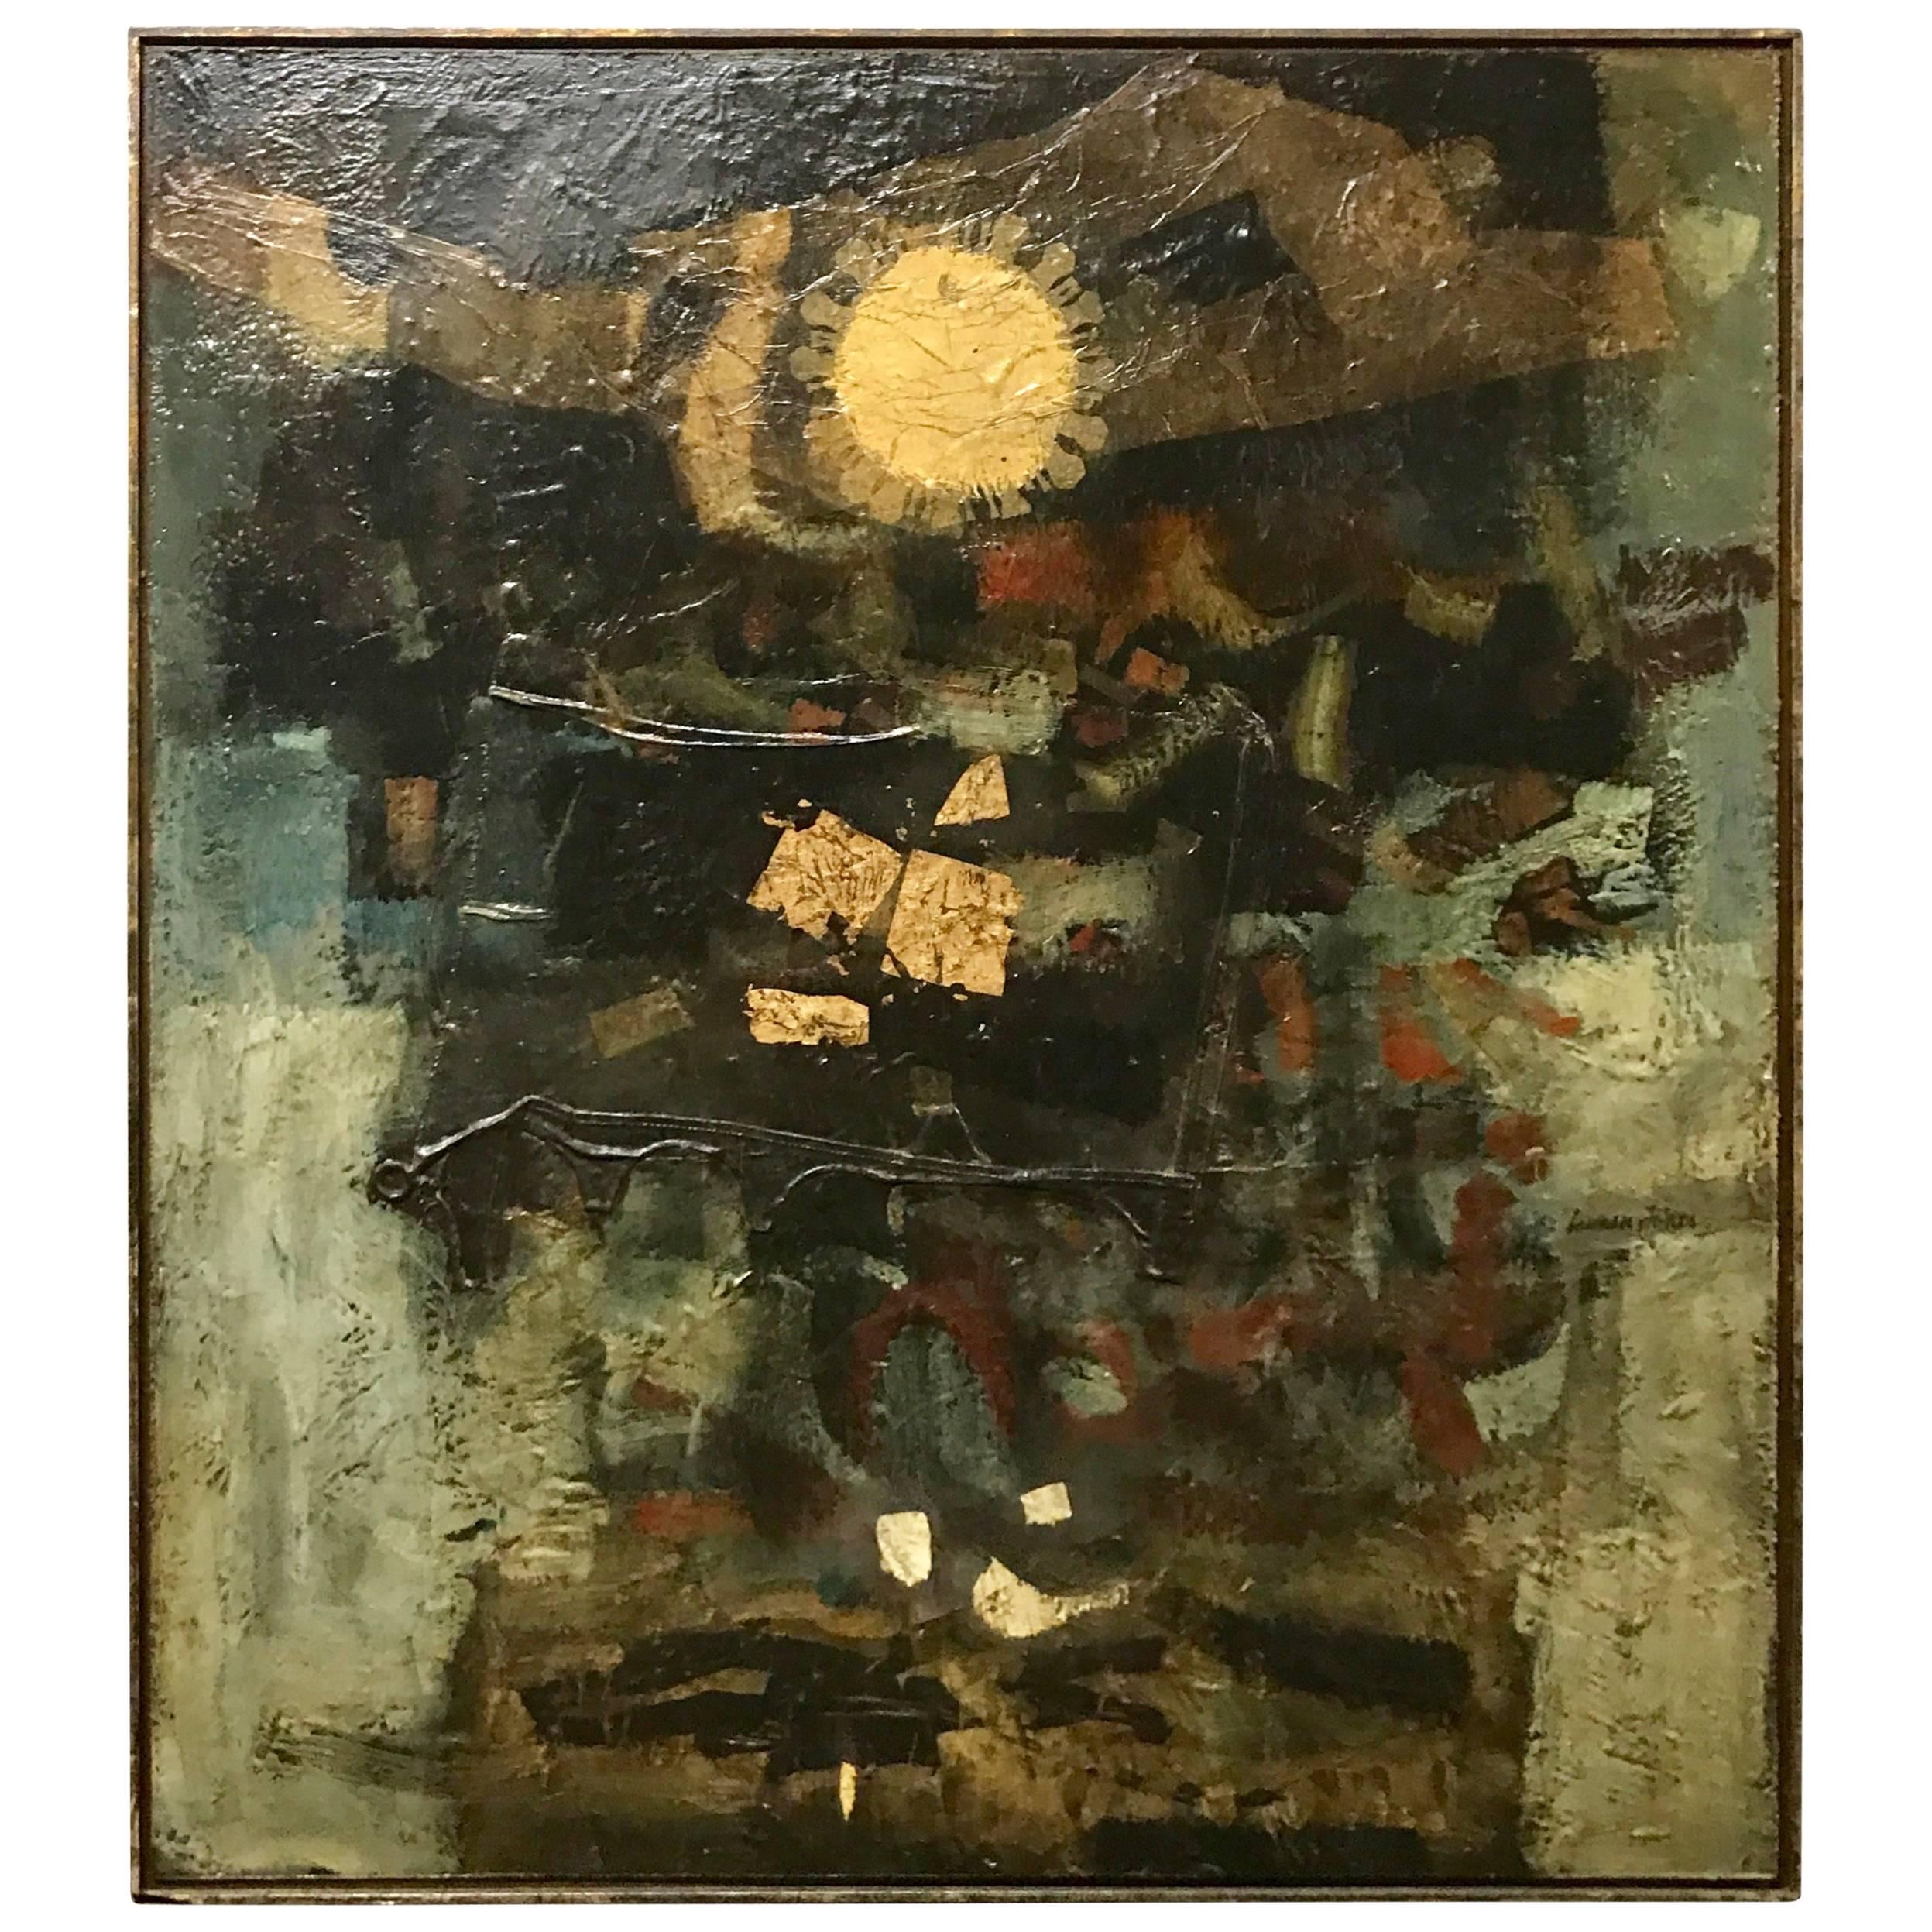 Large Modern Abstract Oil Painting on Canvas "Night Sun" by Layman Jones, 1962